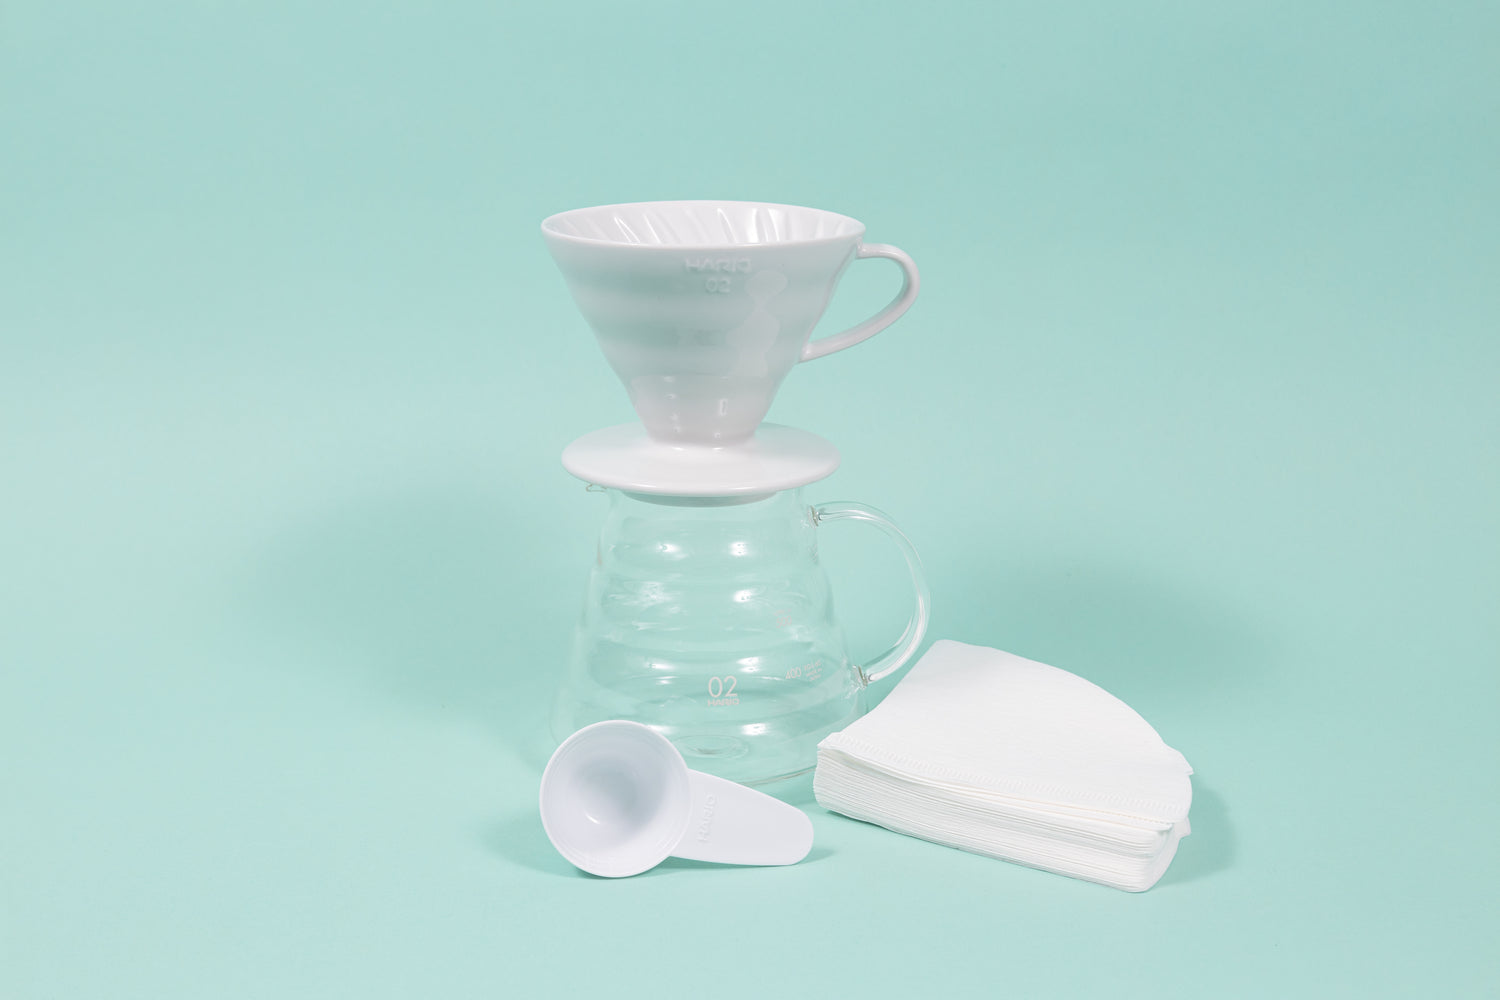 White ceramic conical coffee dripper with handle on top of an all glass coffee server with handle and plastic scoop and filter stack.